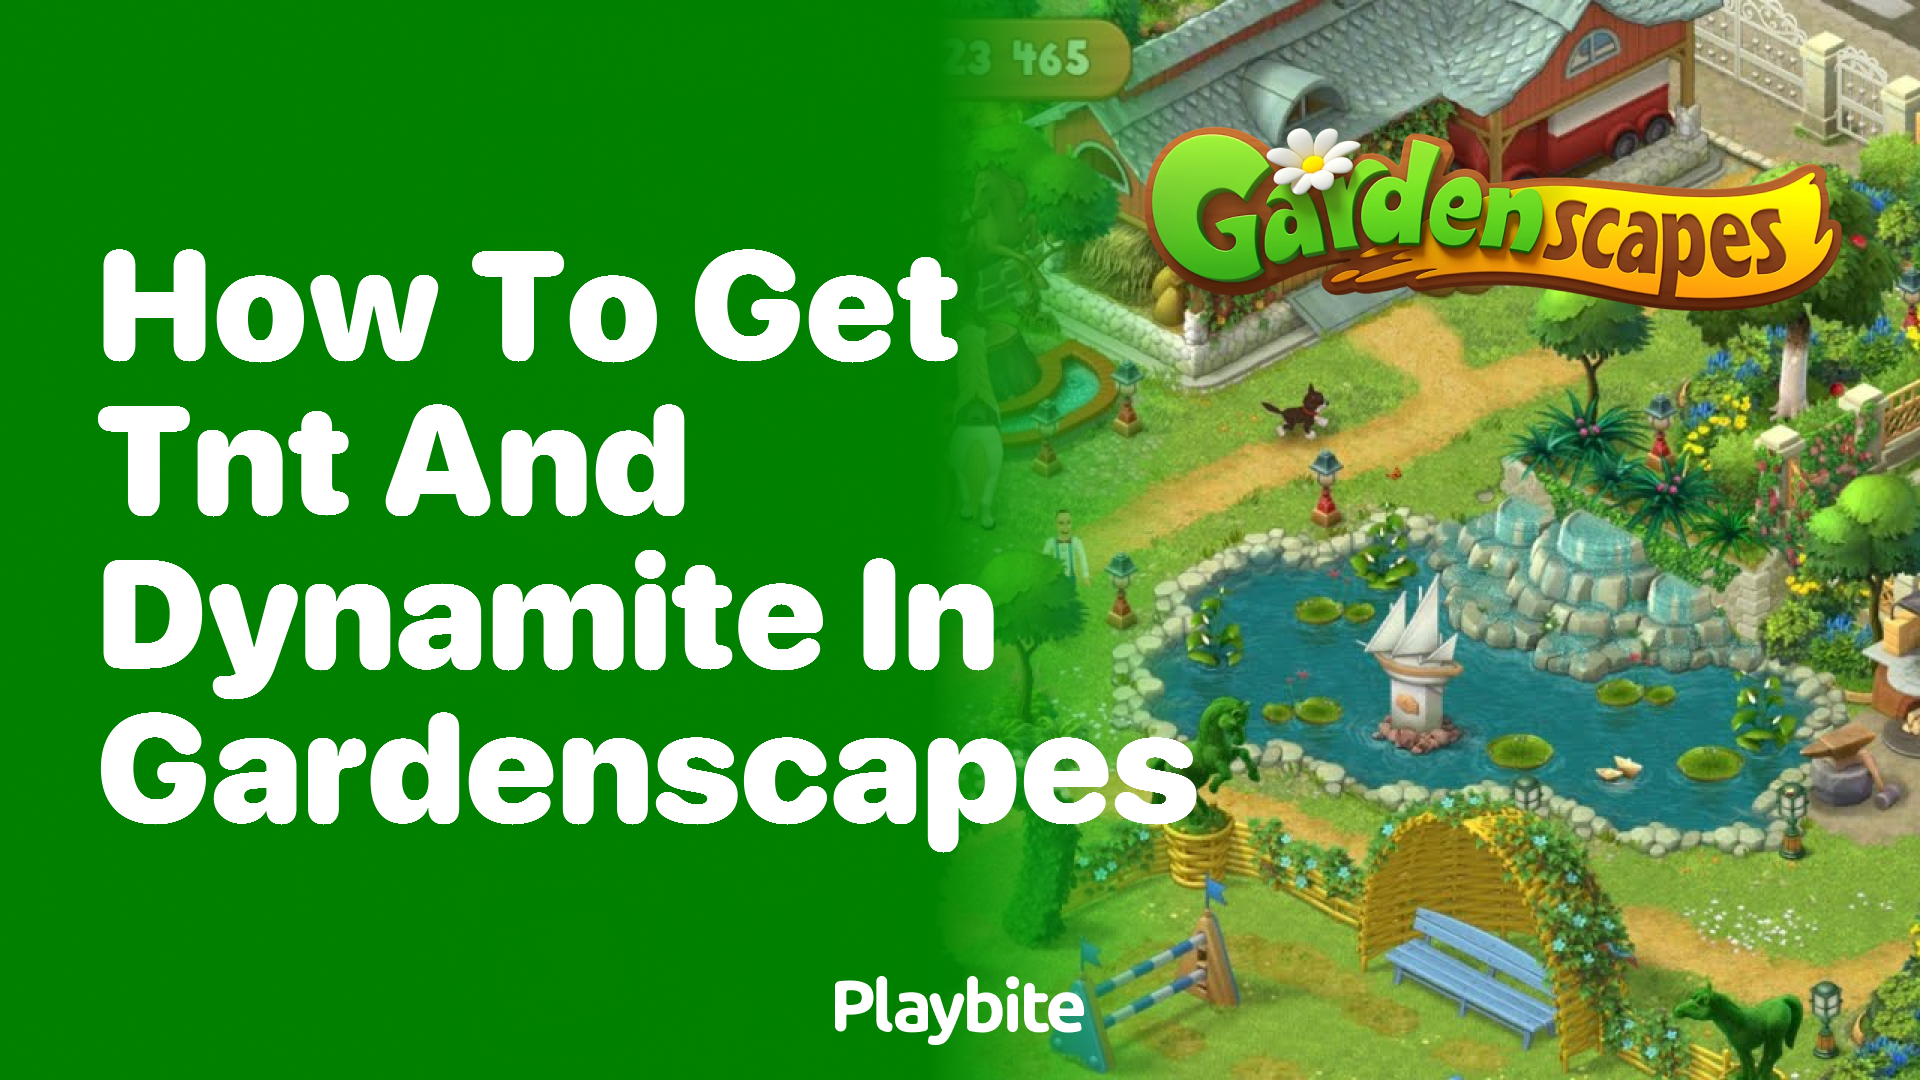 How to Get TNT and Dynamite in Gardenscapes